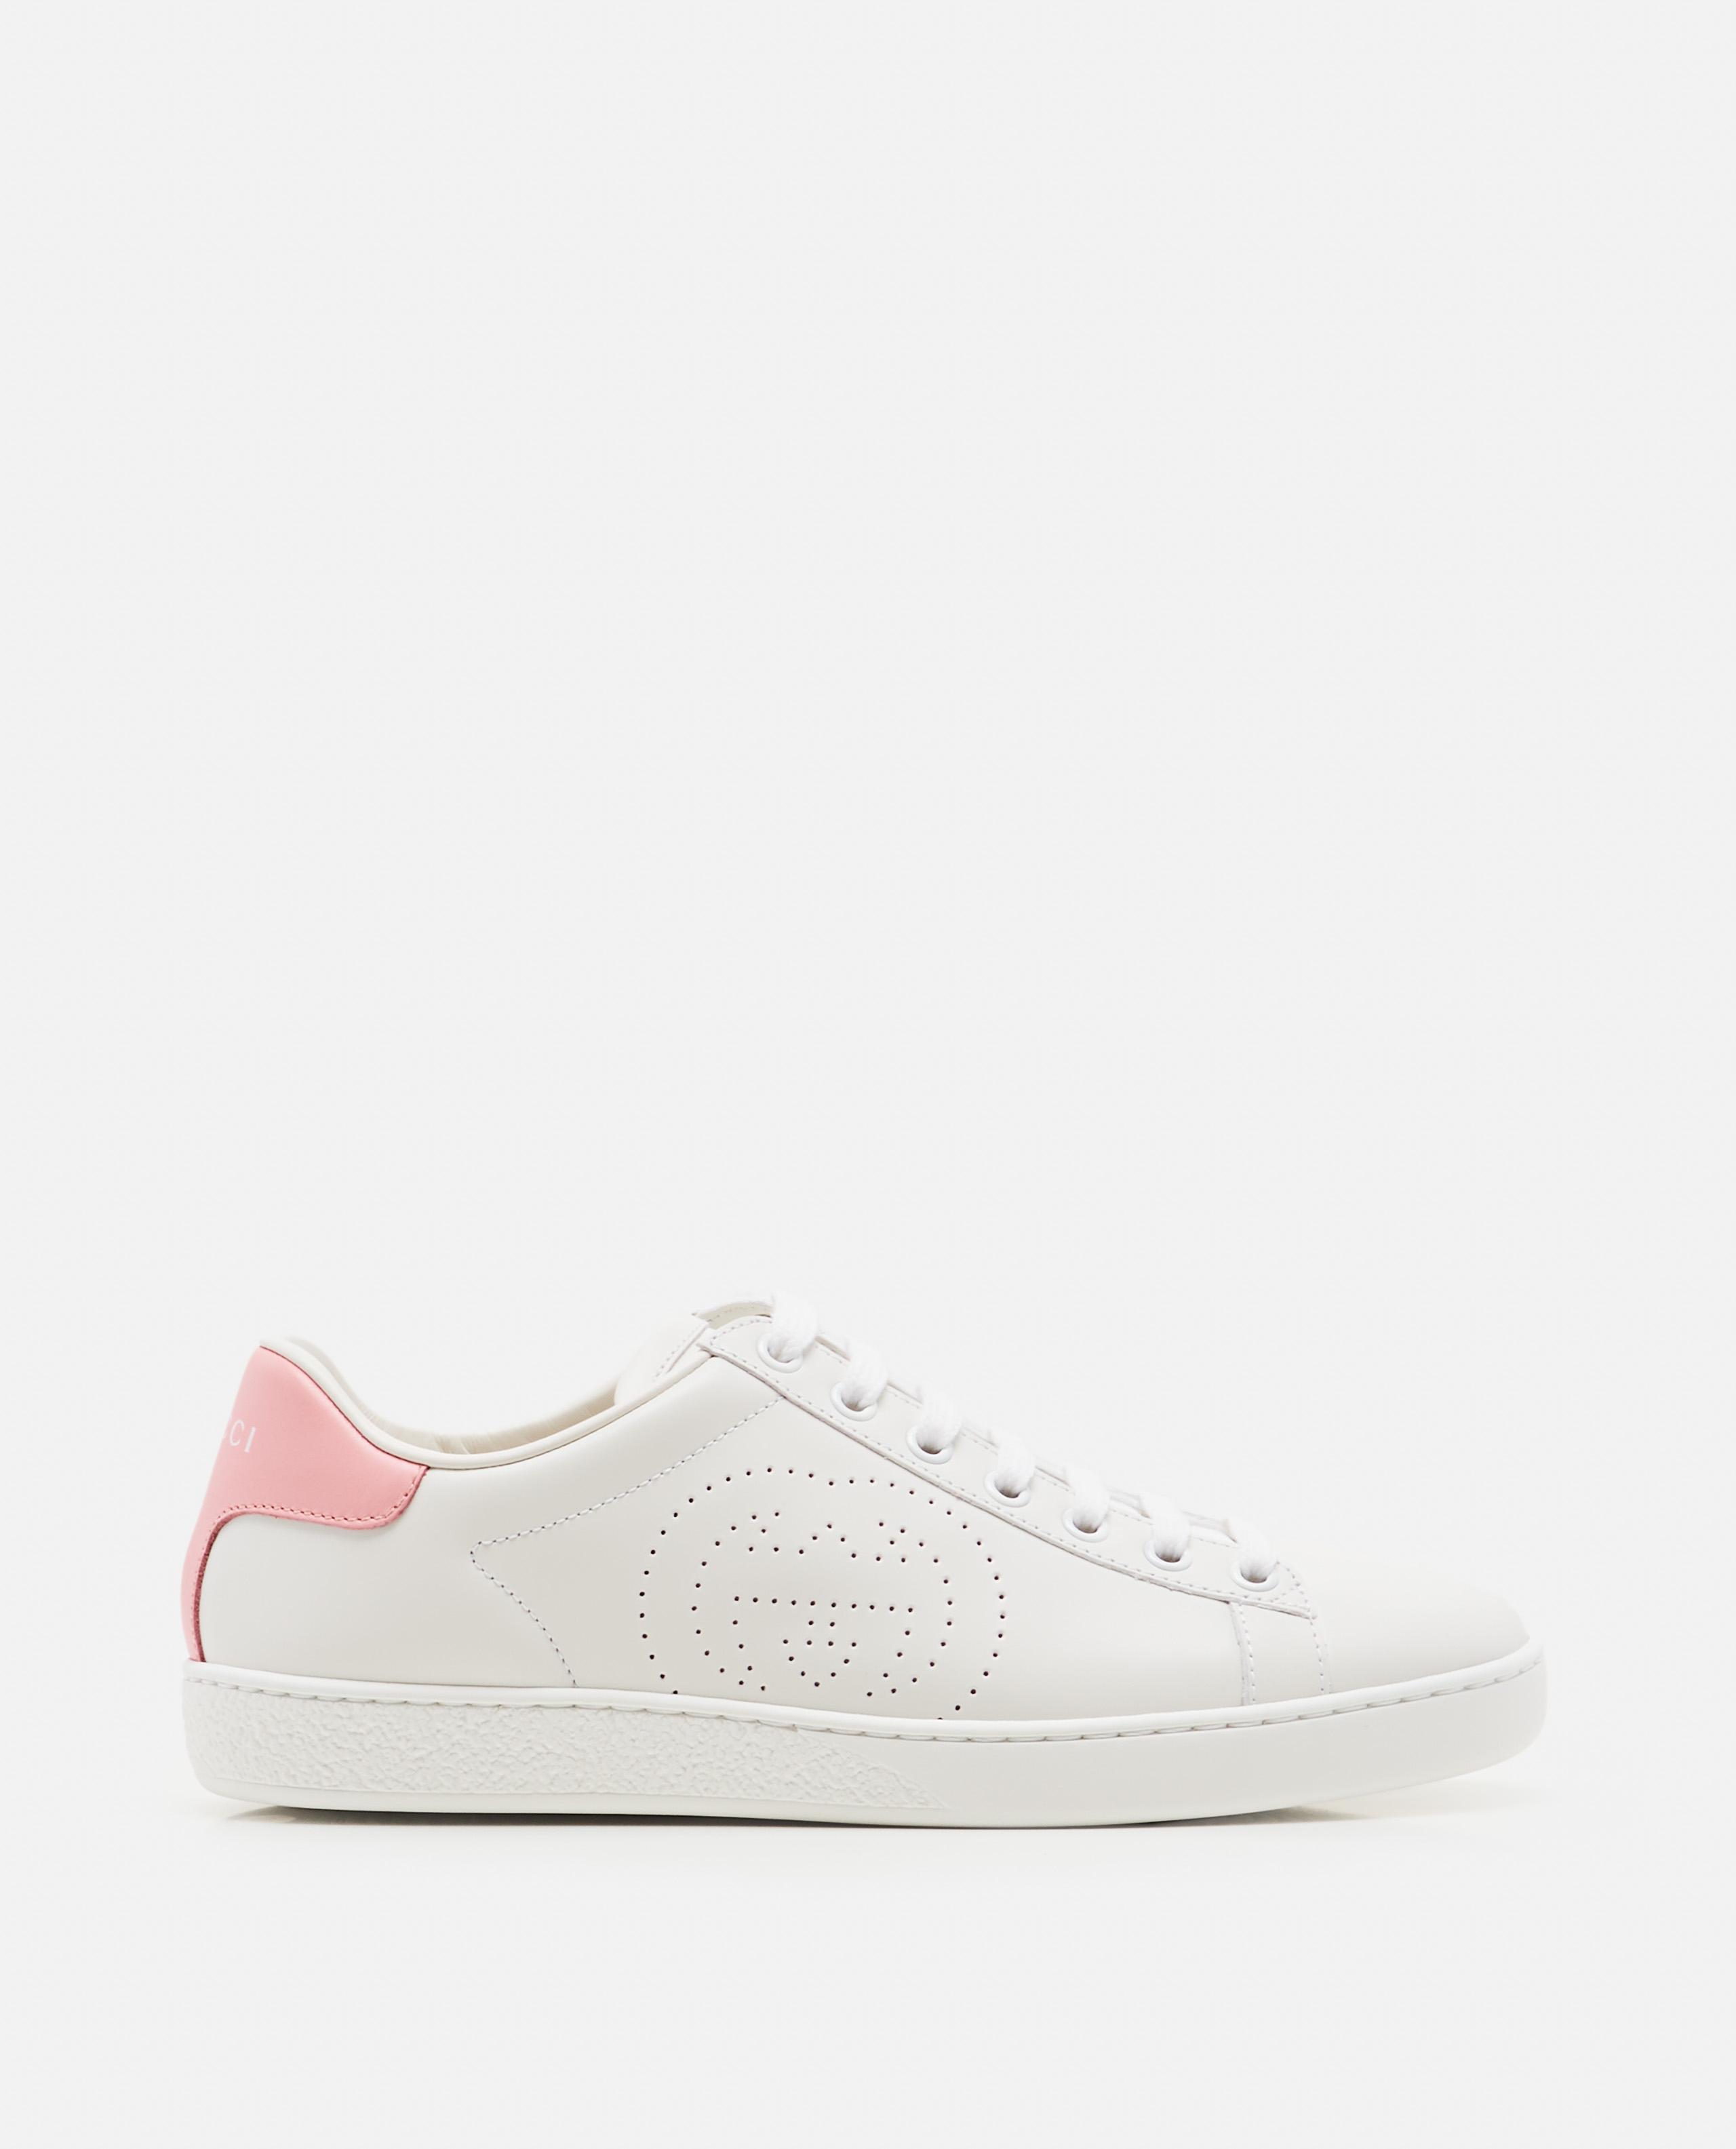 Gucci Ace Women's Sneaker With GG in White - Lyst